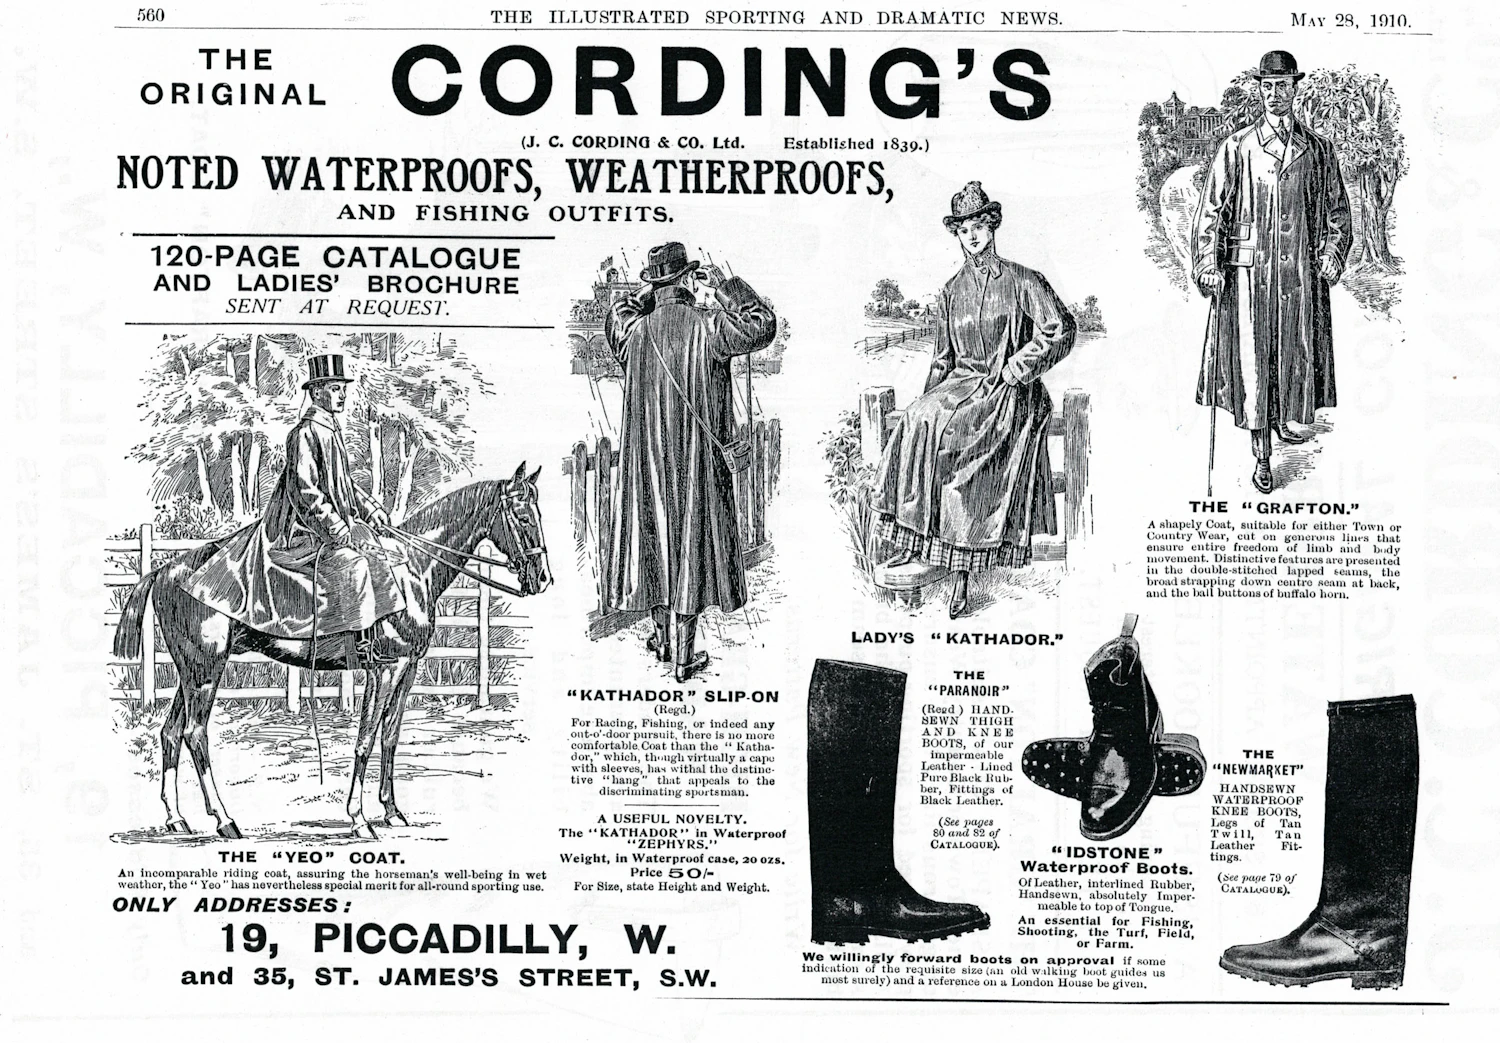 A 1910 advertisement featuring the 'Mackintosh'